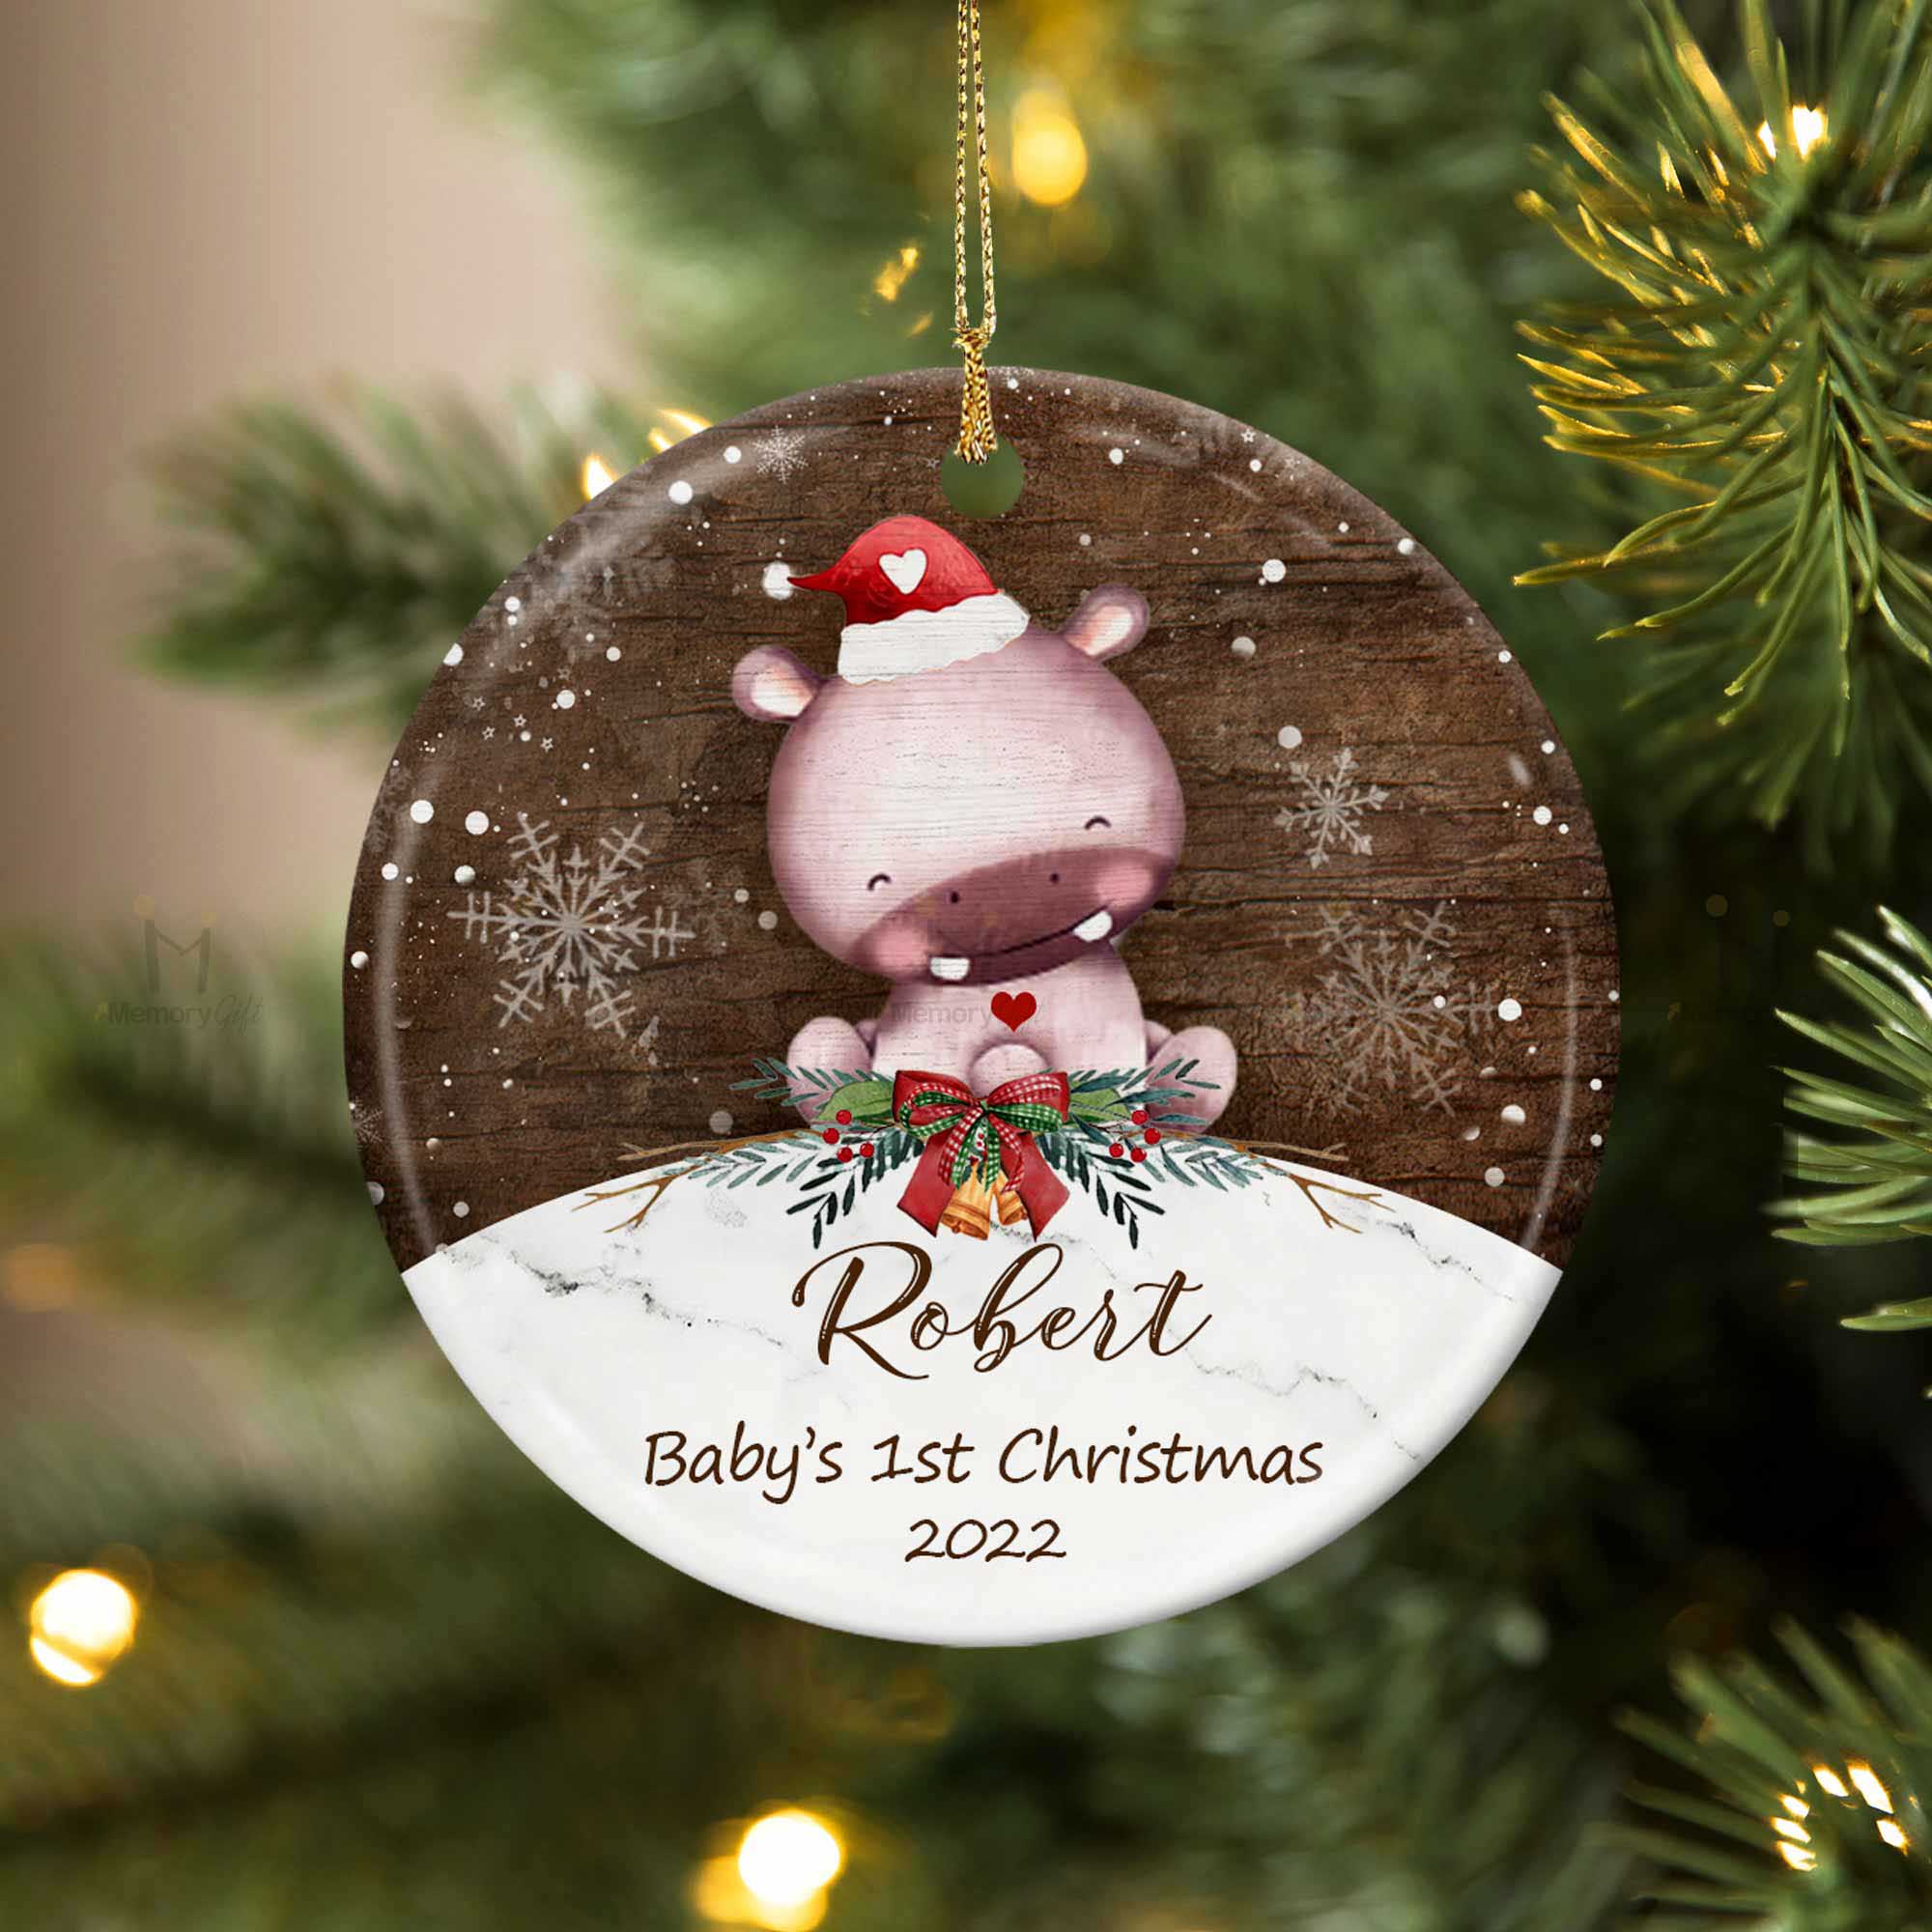 babys first christmas ornament 2022